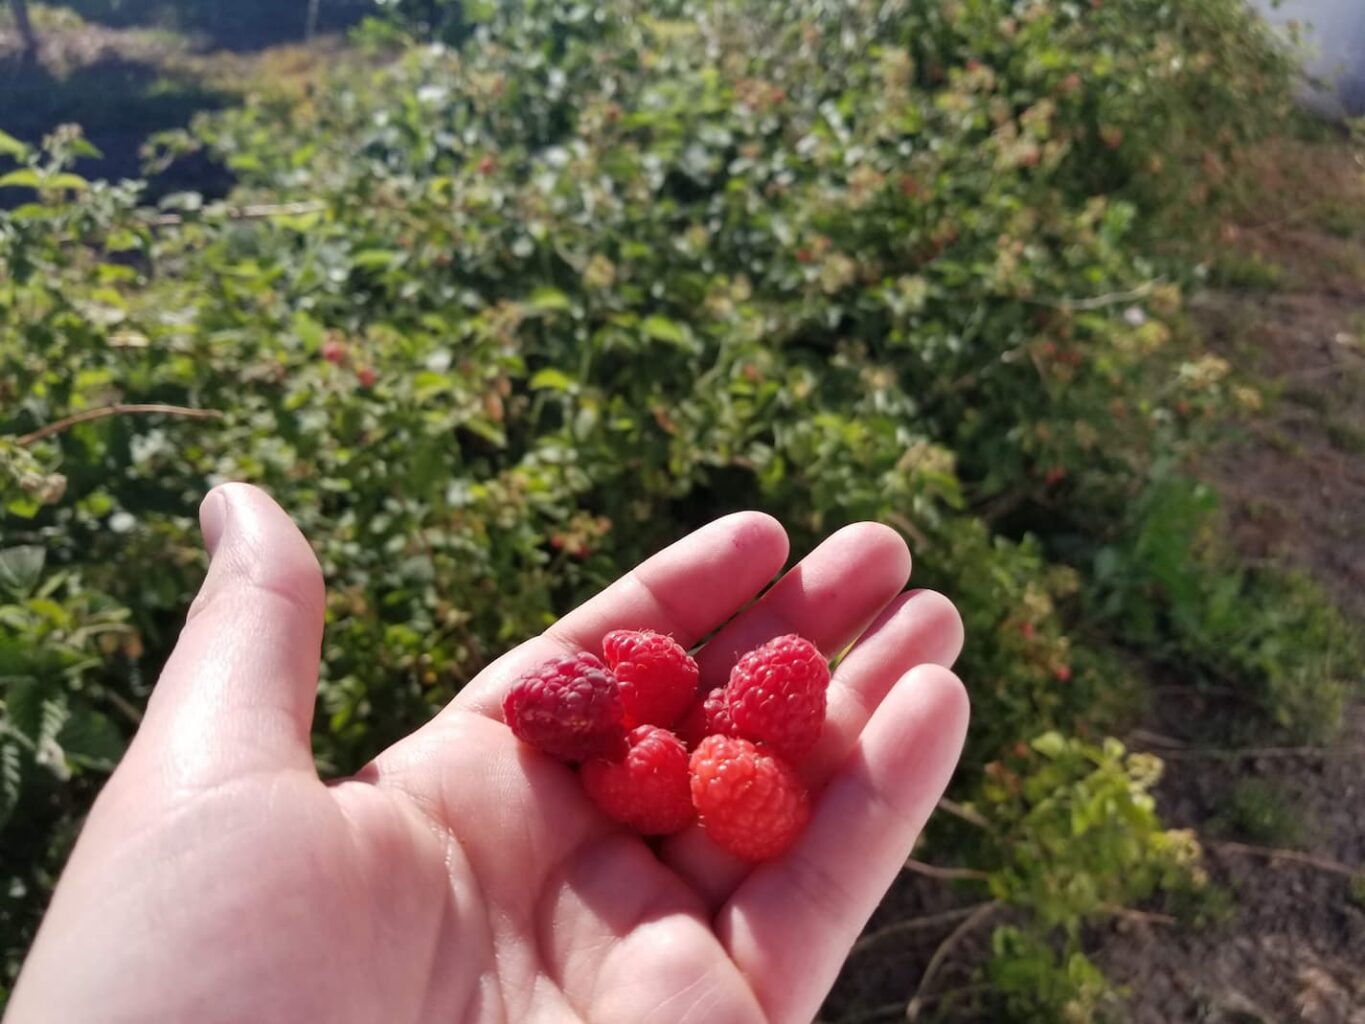 An image of freshly picked raspberries in our backyard next to the berry bushes.